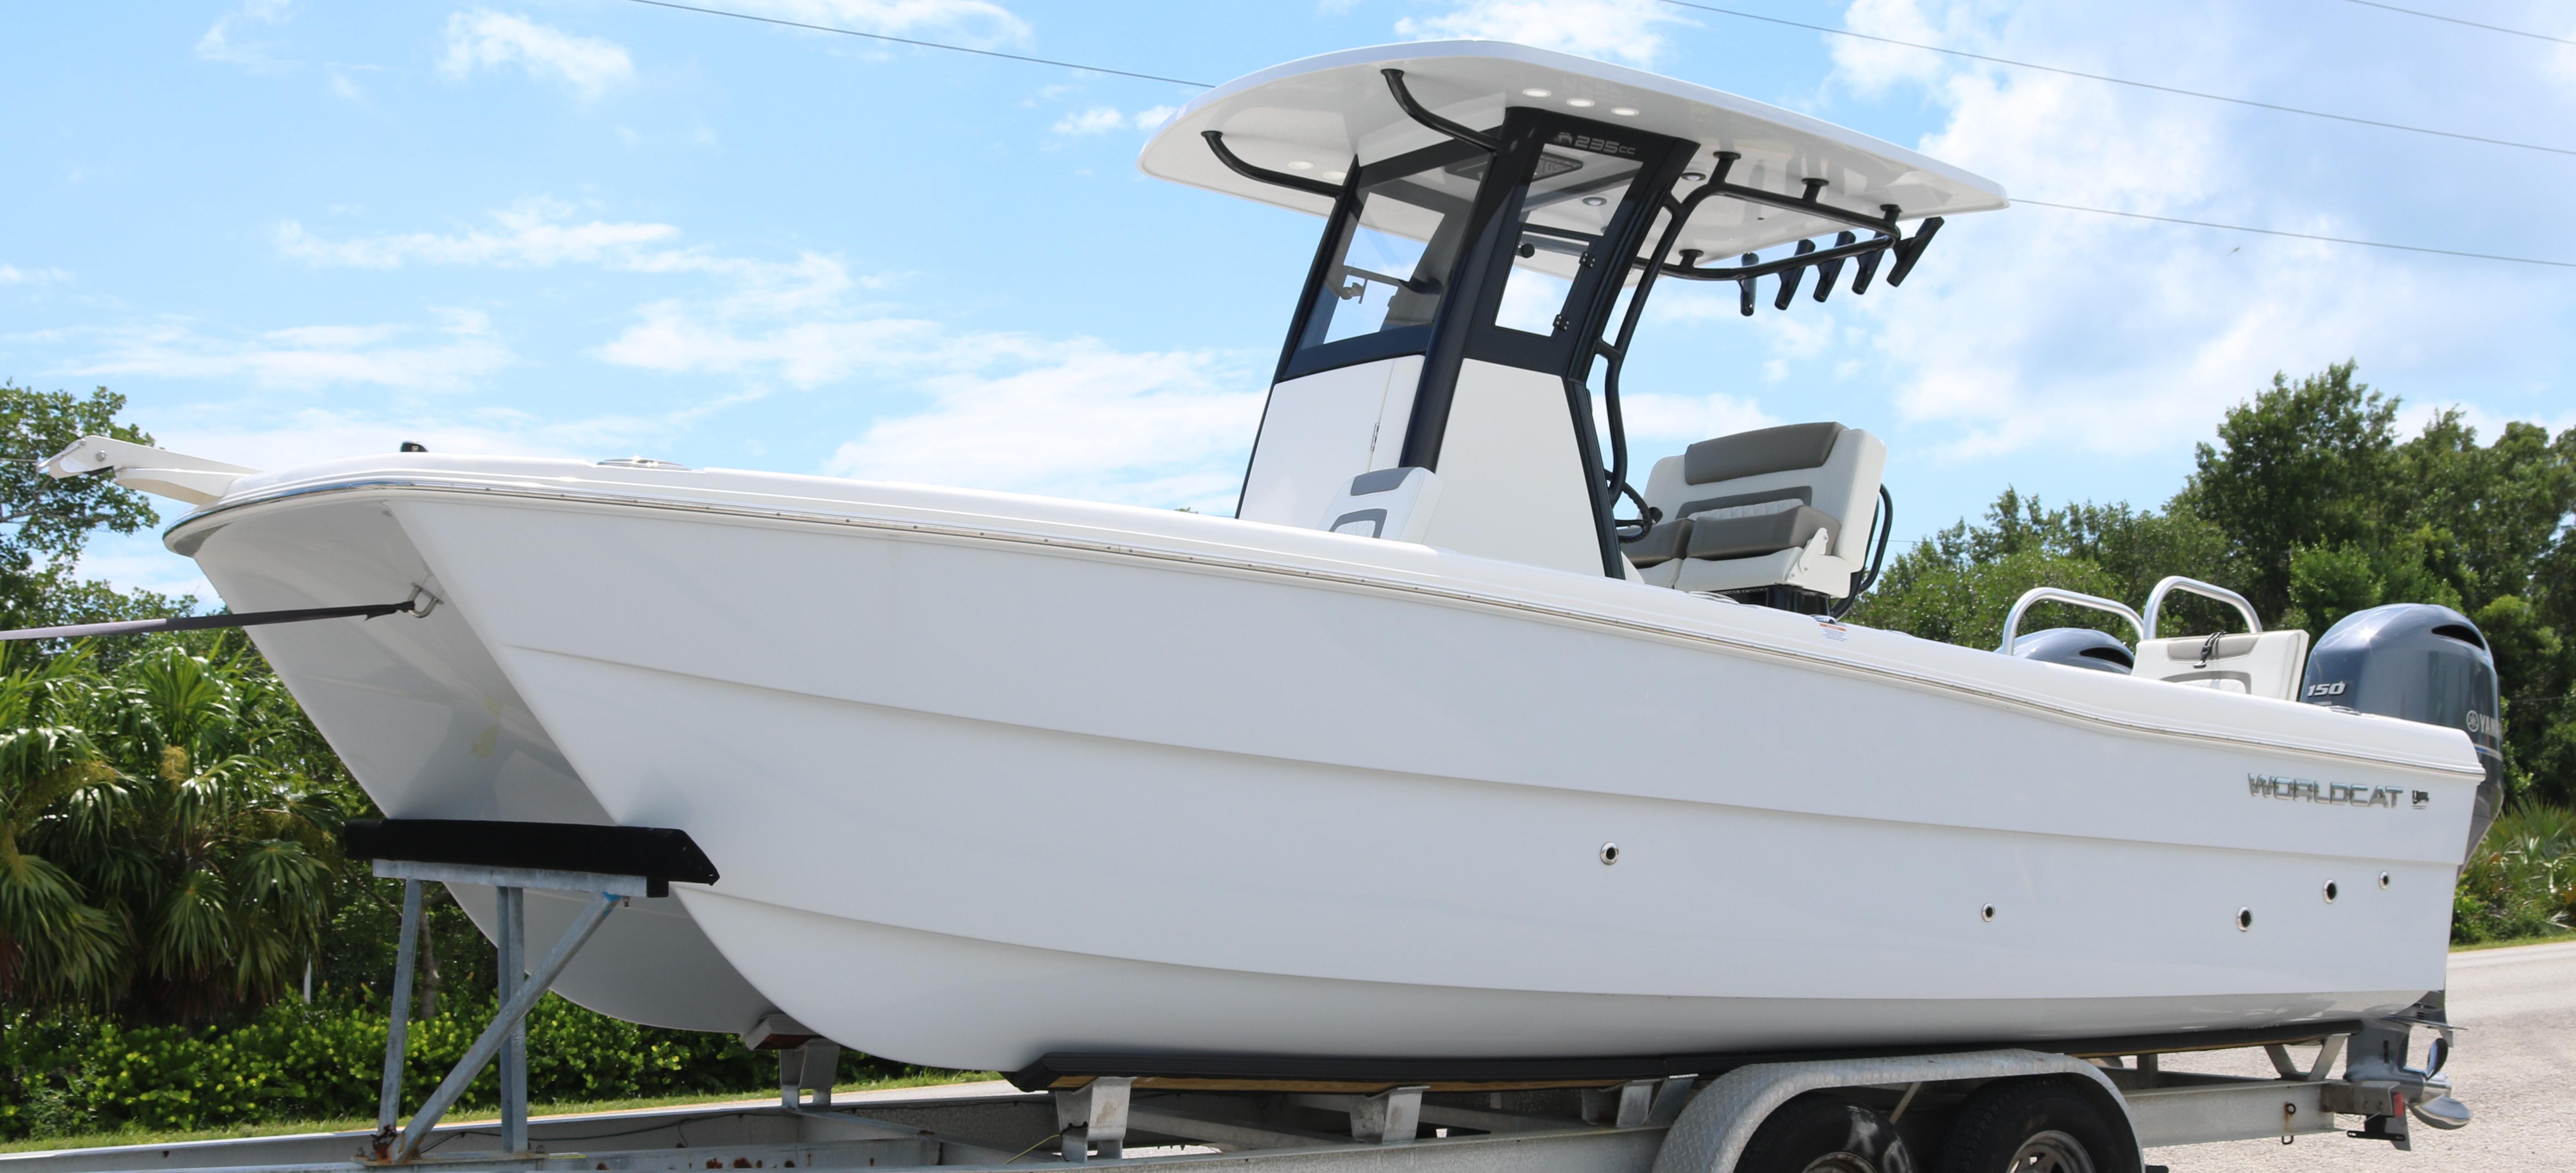 World Cat 235 Center Console - The Fisherman